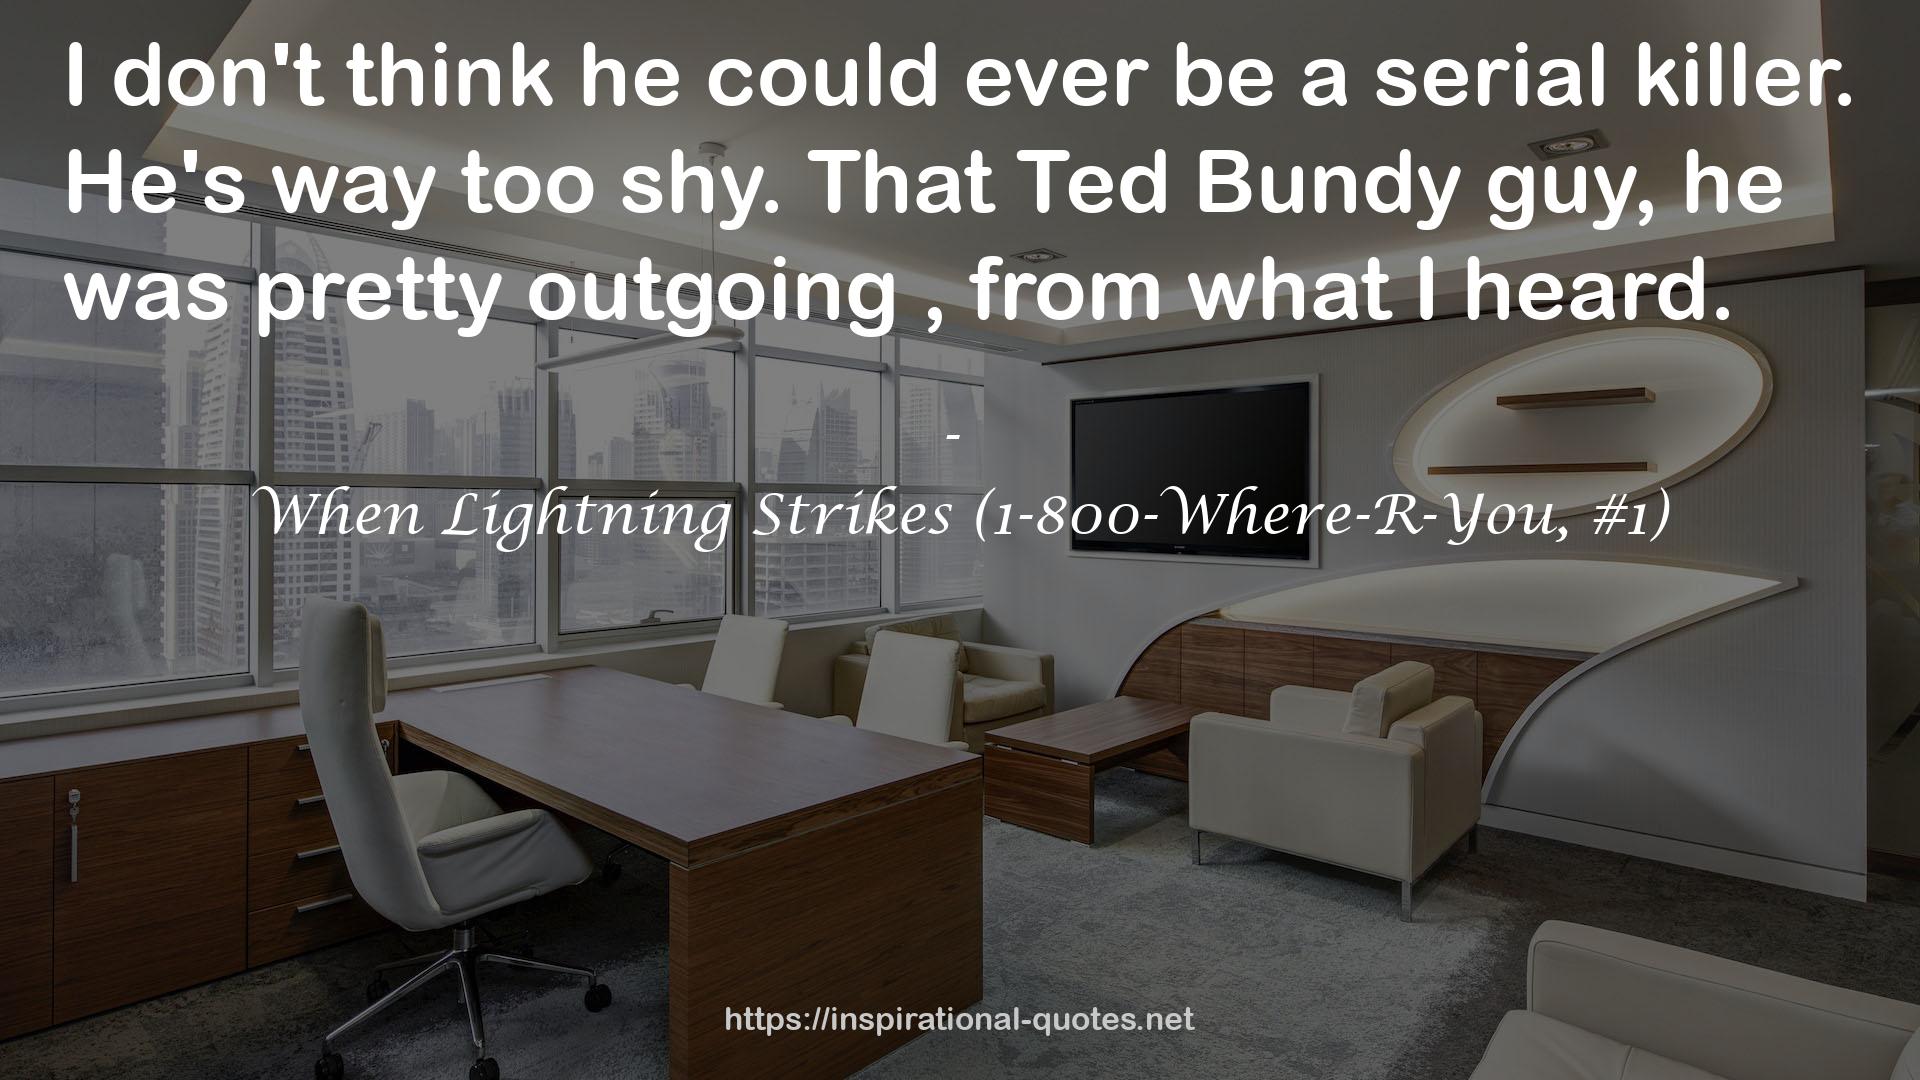 When Lightning Strikes (1-800-Where-R-You, #1) QUOTES